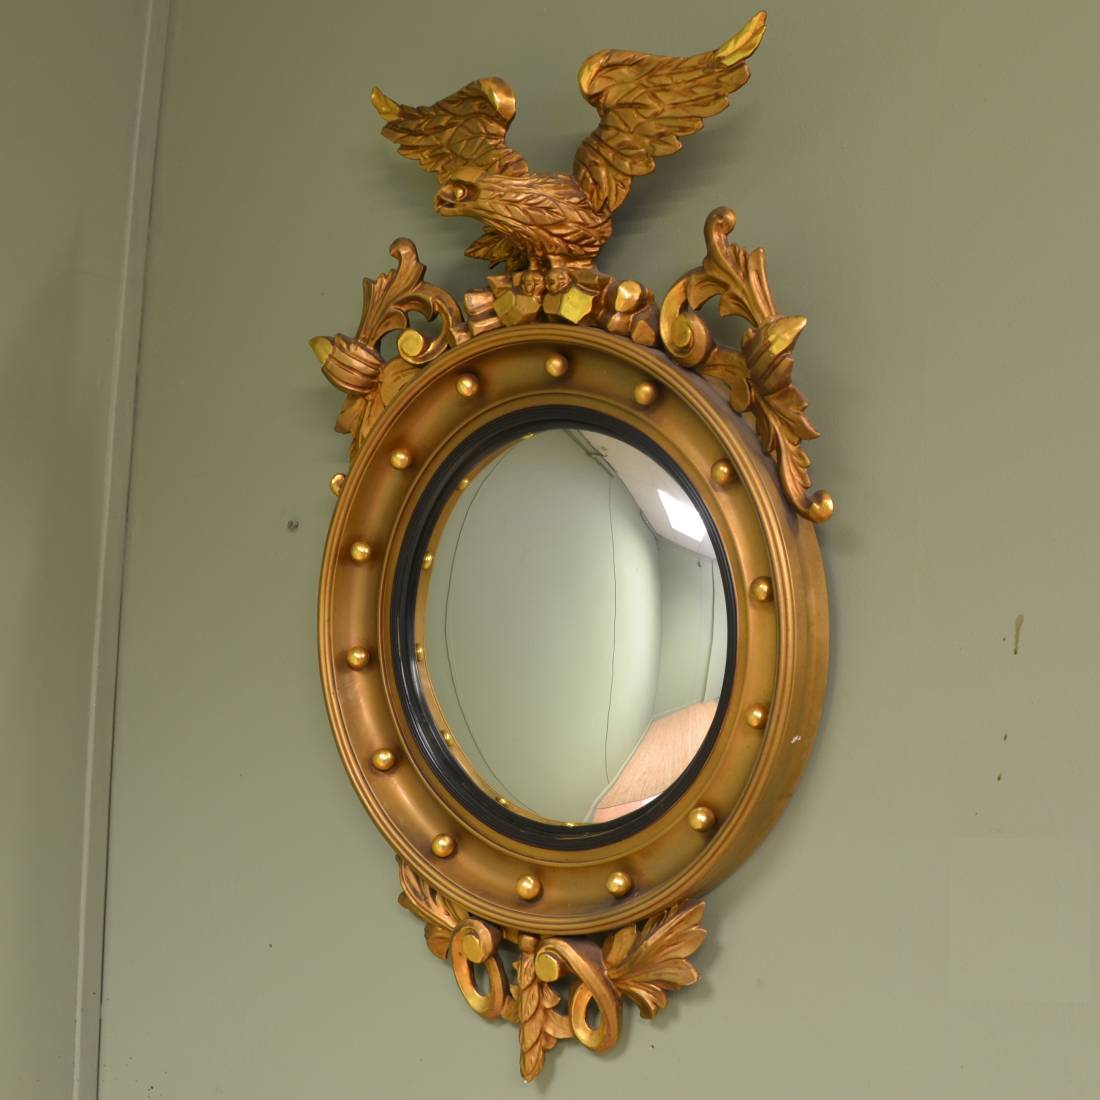 The History, Styles and Caring for Antique Mirrors. - Antiques World